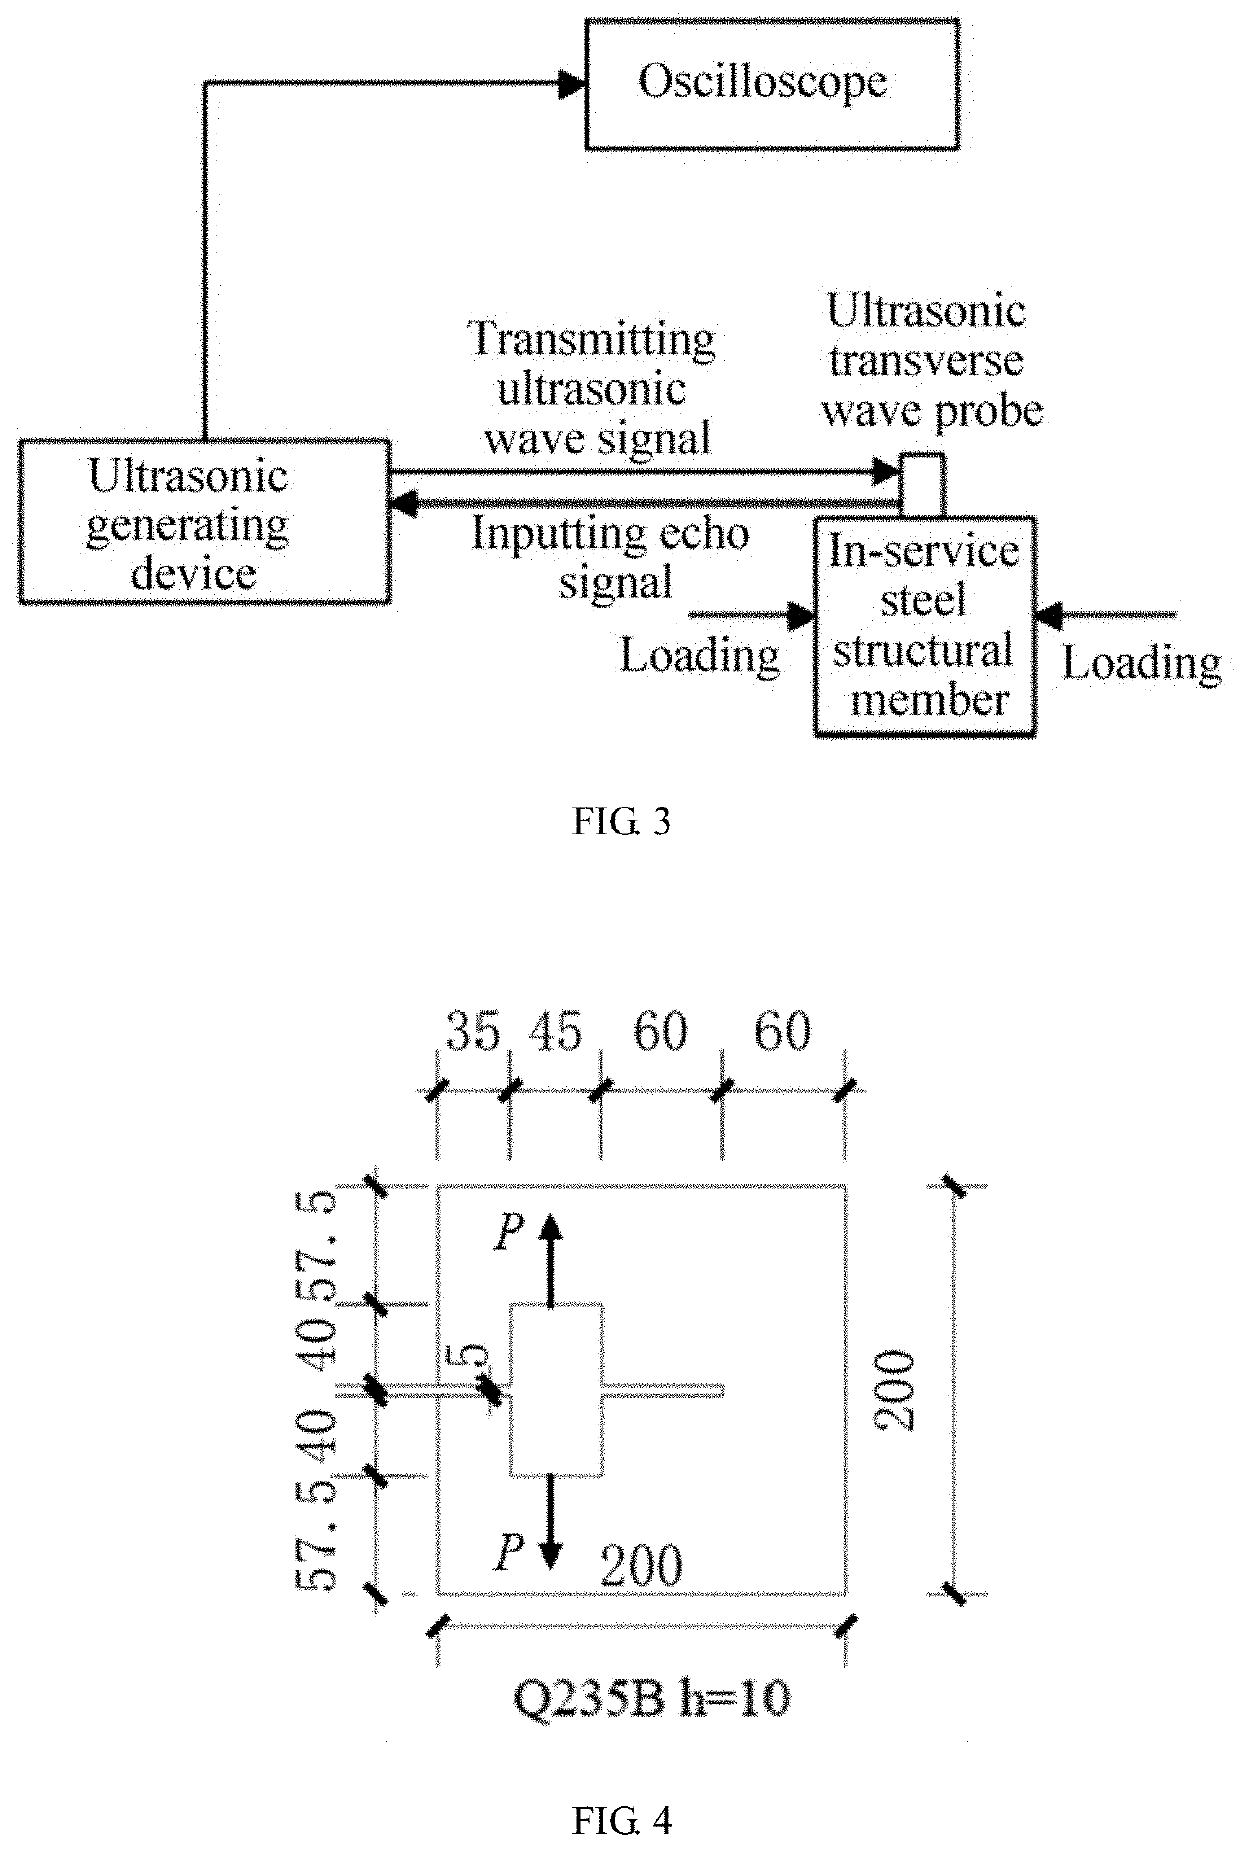 Method for determining plane stresses on in-service steel structure member based on phase spectrum of ultrasonic transverse wave